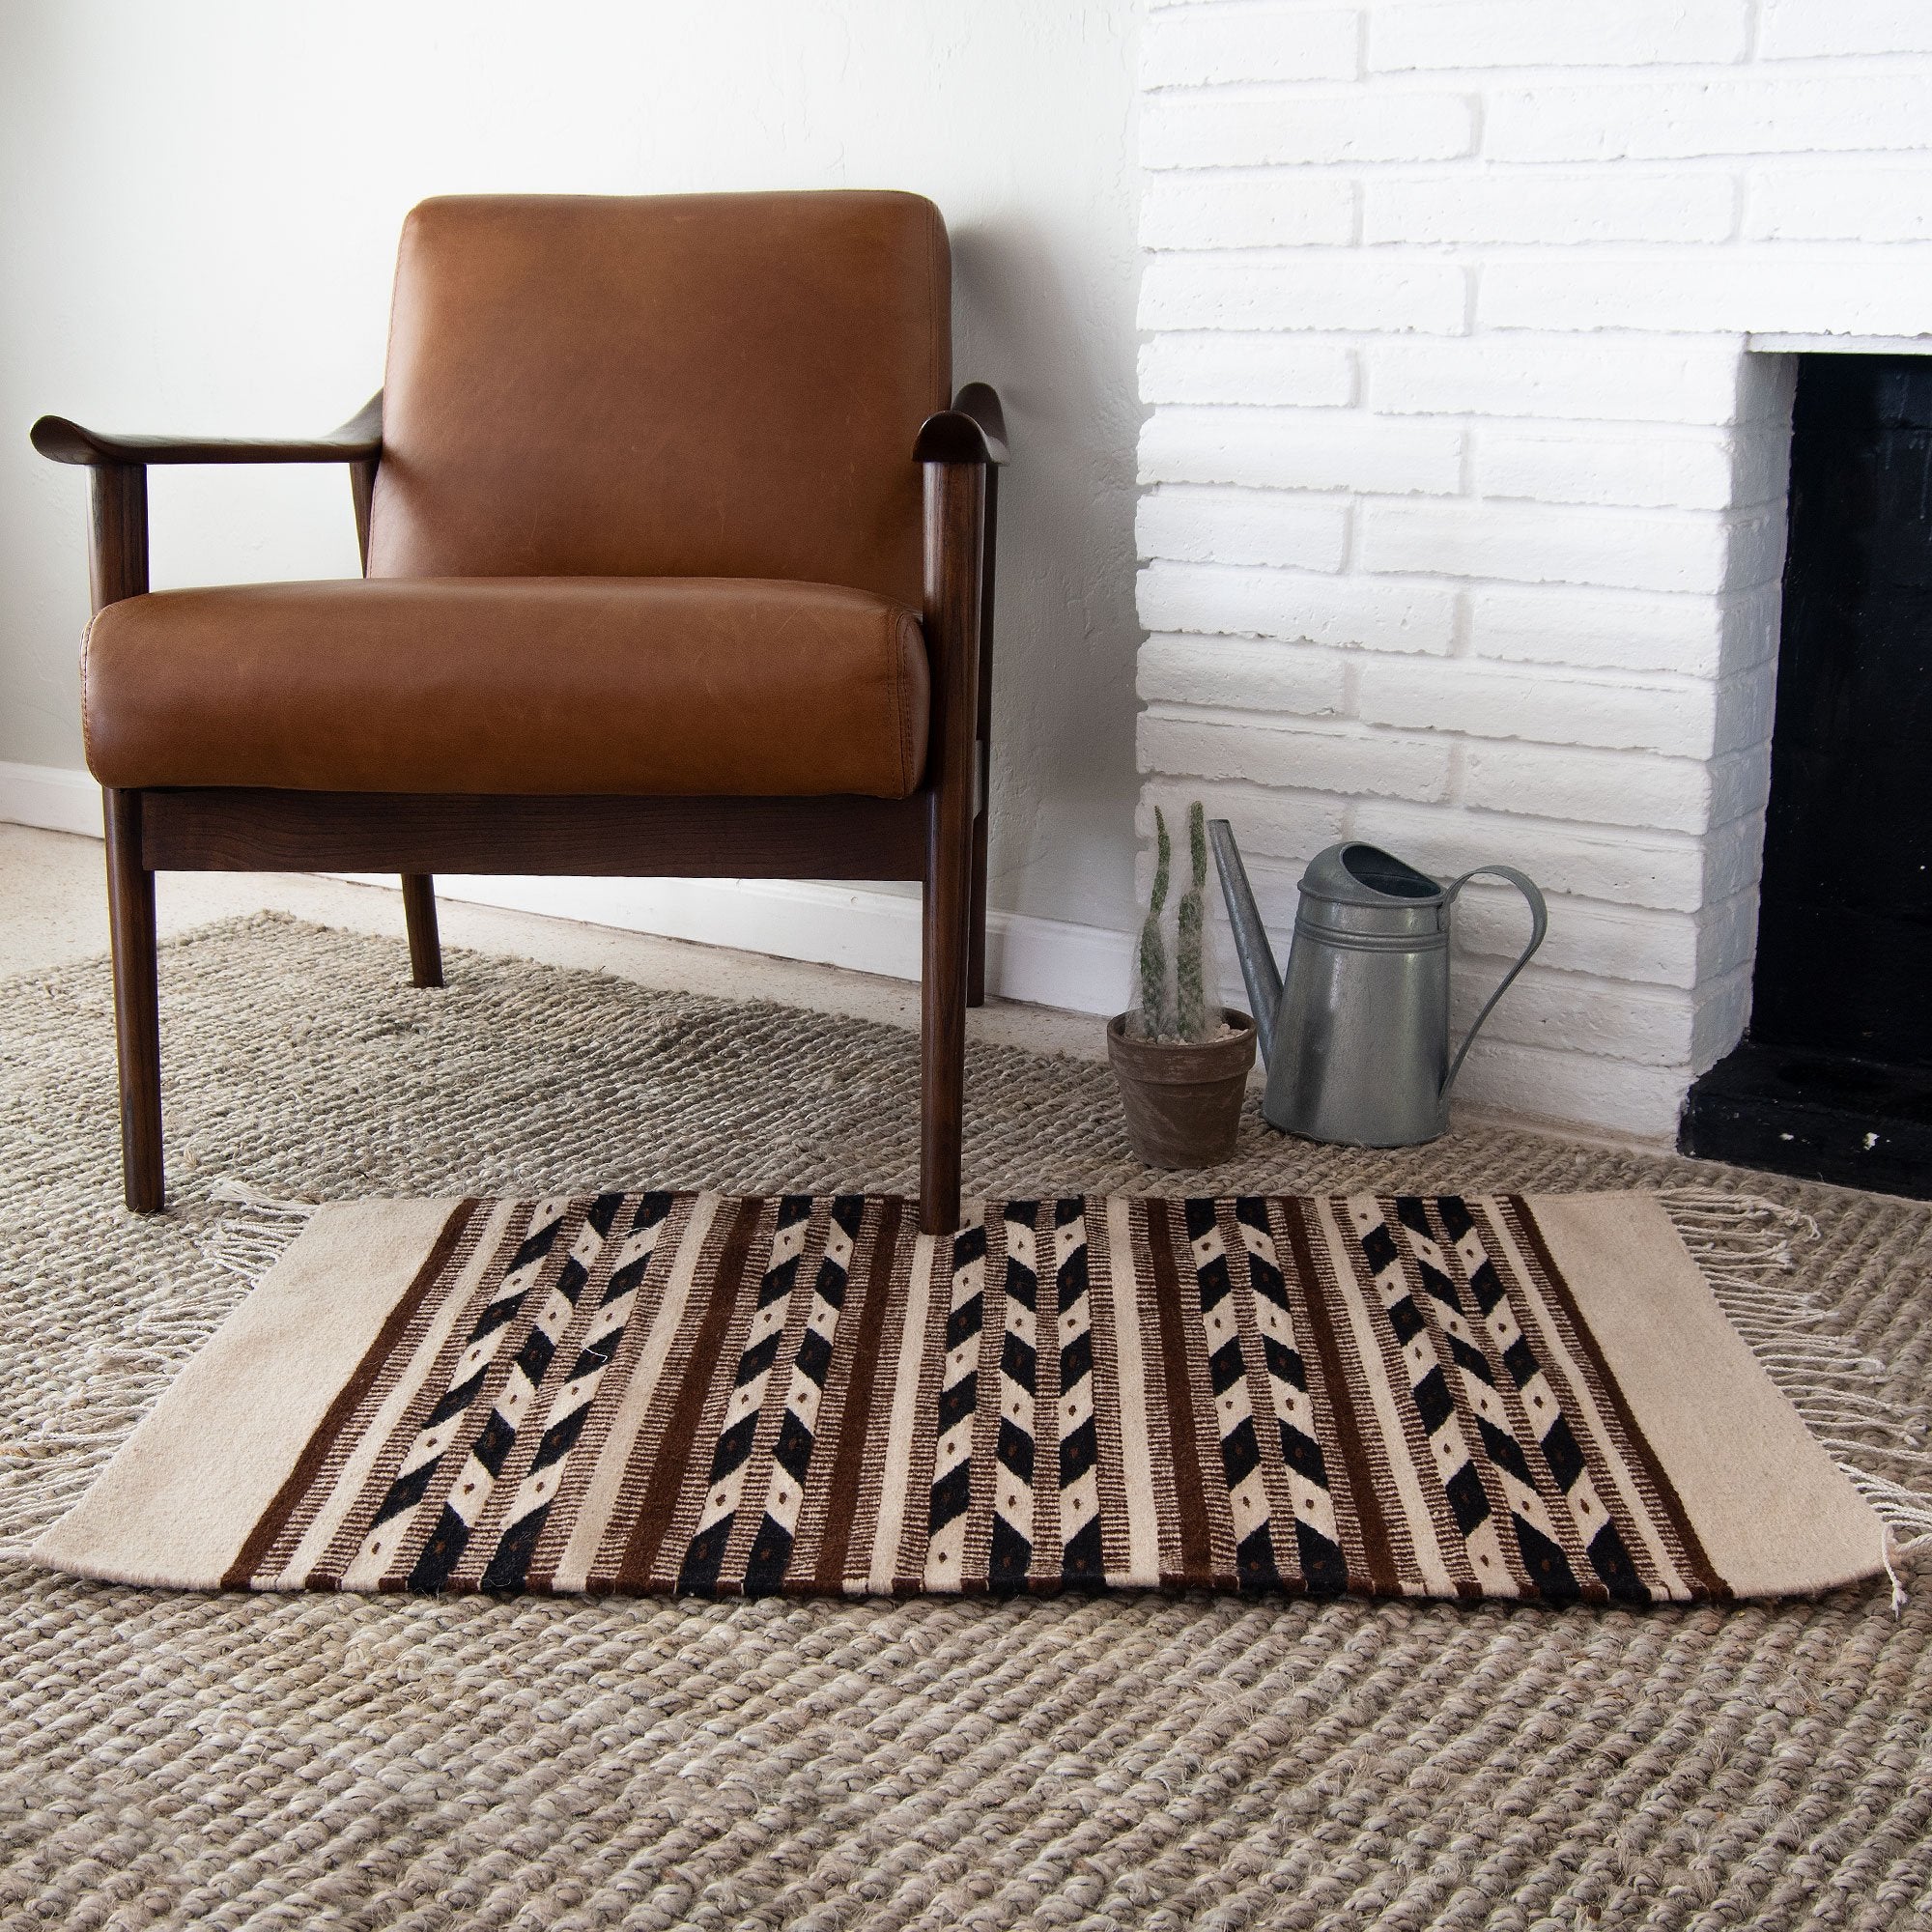 Neza Native American Rug with Arrows Design - life of kuhl @HOME